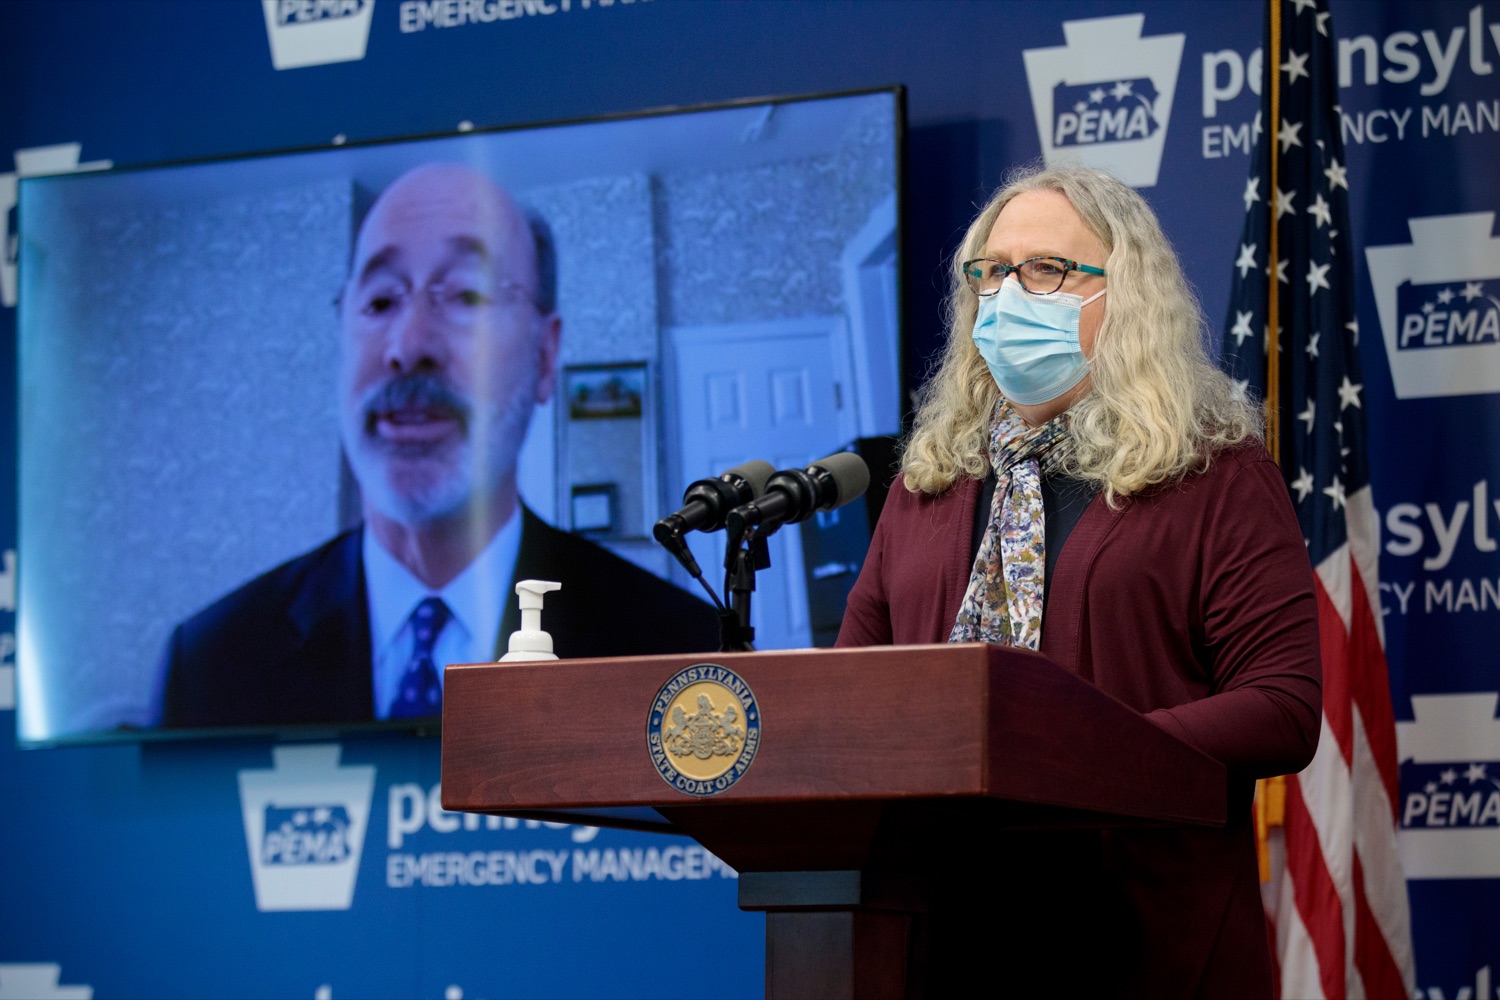 Pennsylvania Department of Health Secretary Dr. Rachel Levine speaks during a press conference inside PEMA headquarters on Wednesday, Dec. 30, 2020.<br><a href="https://filesource.amperwave.net/commonwealthofpa/photo/18455_GOV_Covid_Update_NK_004.jpg" target="_blank">⇣ Download Photo</a>